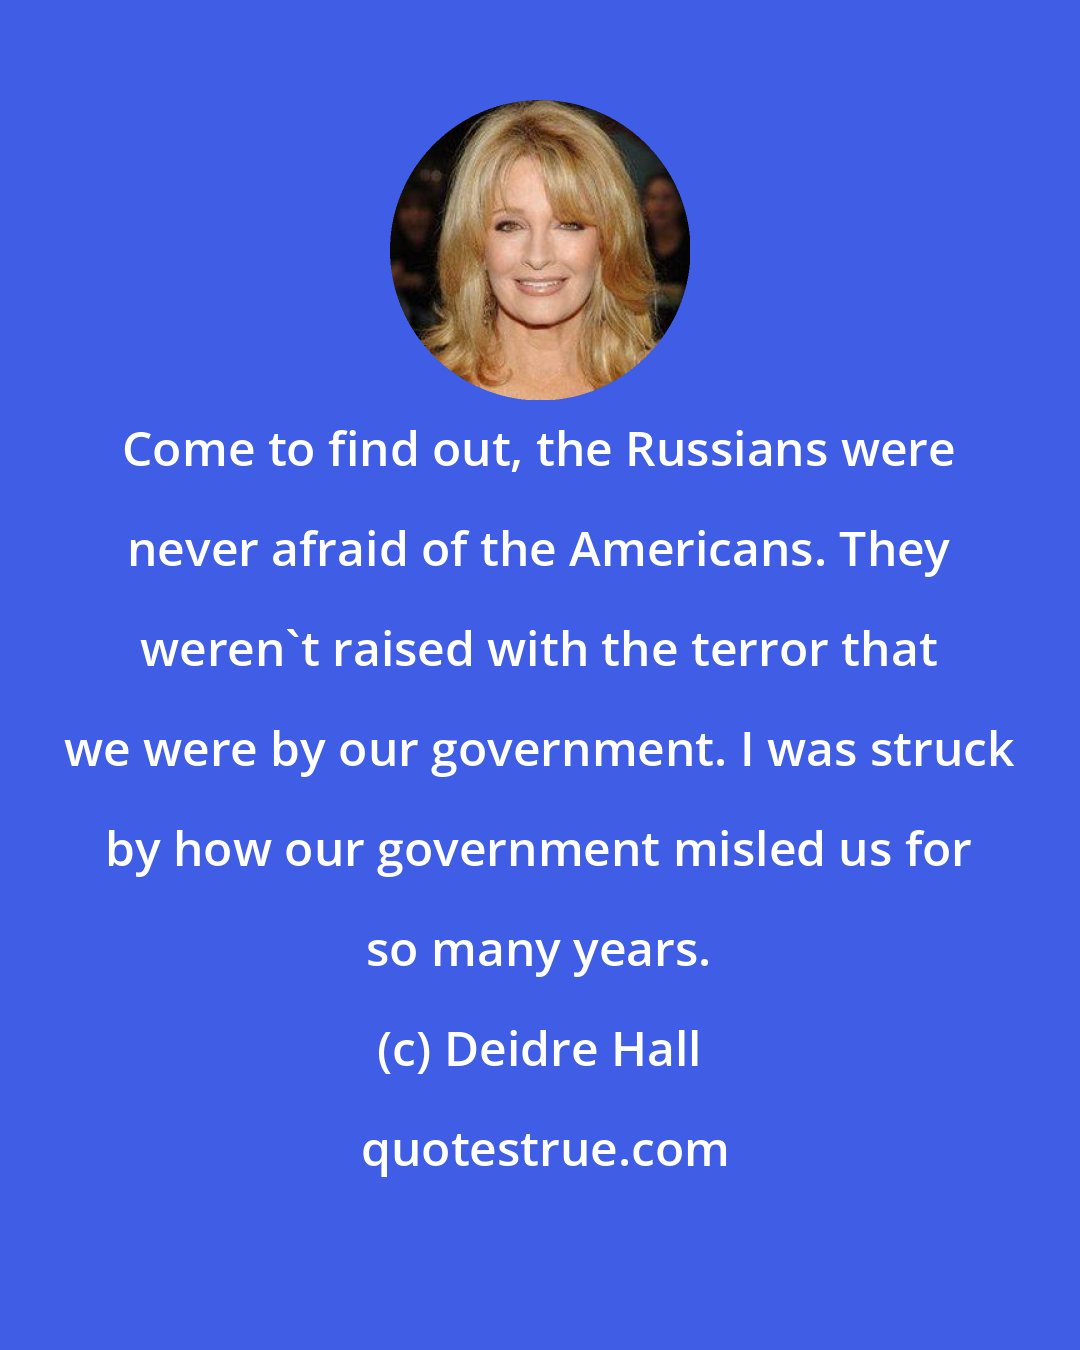 Deidre Hall: Come to find out, the Russians were never afraid of the Americans. They weren't raised with the terror that we were by our government. I was struck by how our government misled us for so many years.